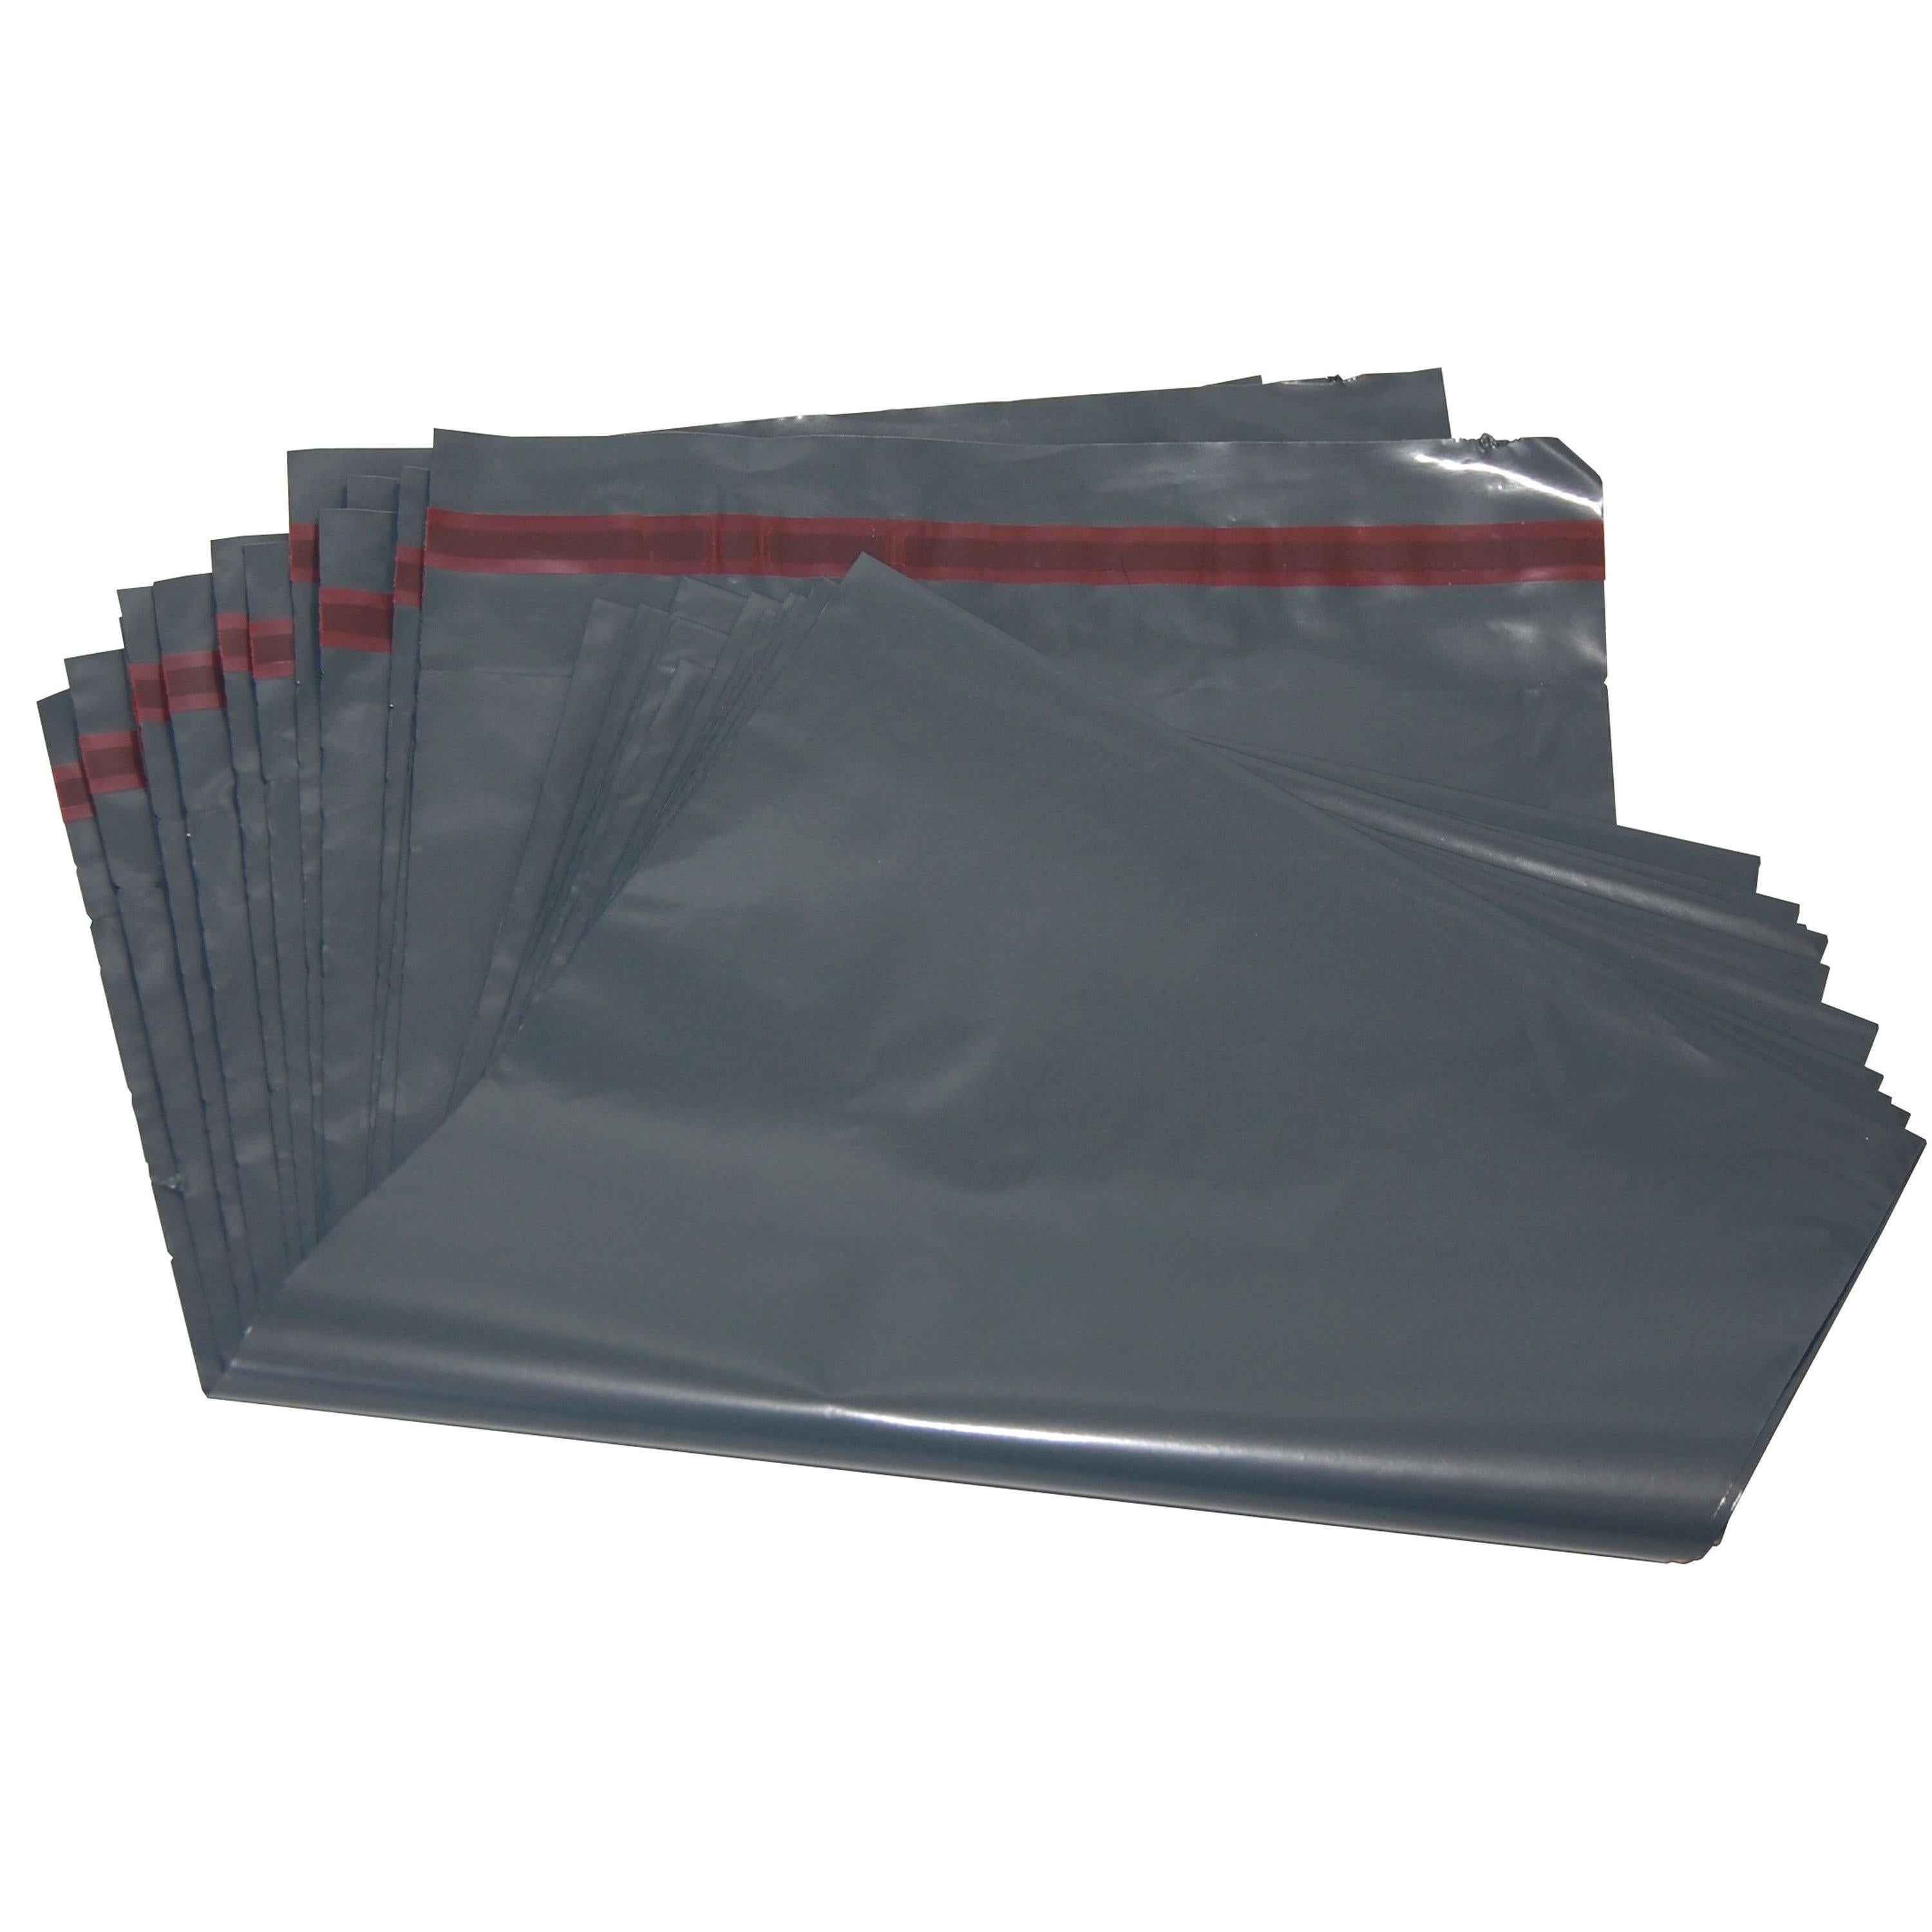 100 Mixed Grey Mailing Poly Postal Self Seal Bags 4 Sizes 25 from Each iSOUL Small to Large Mailing Bags Postage Packaging Assorted Mailers Posting Shipping Post Parcel Package Bags - iSOUL